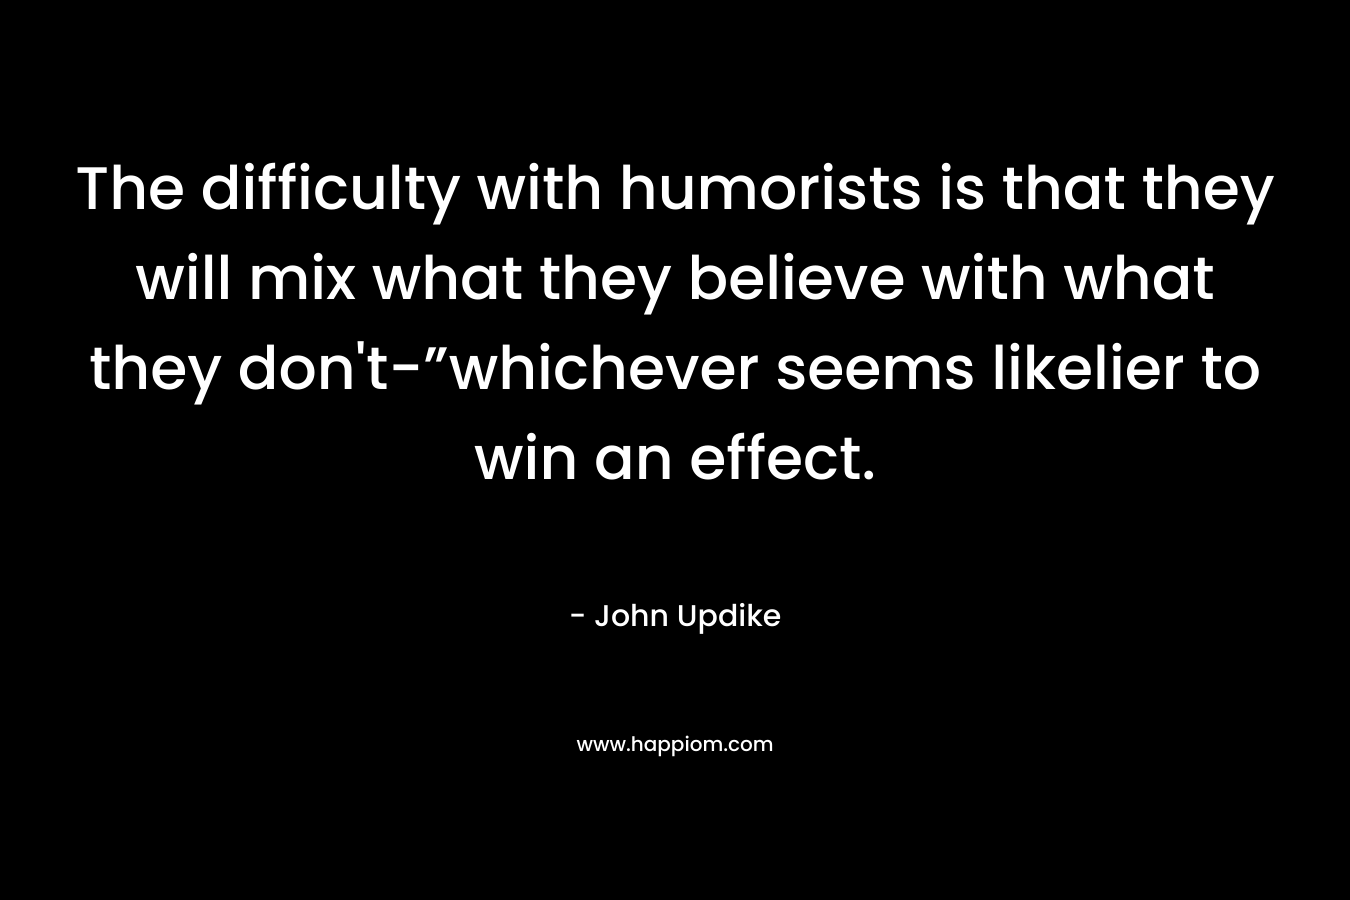 The difficulty with humorists is that they will mix what they believe with what they don't-”whichever seems likelier to win an effect.